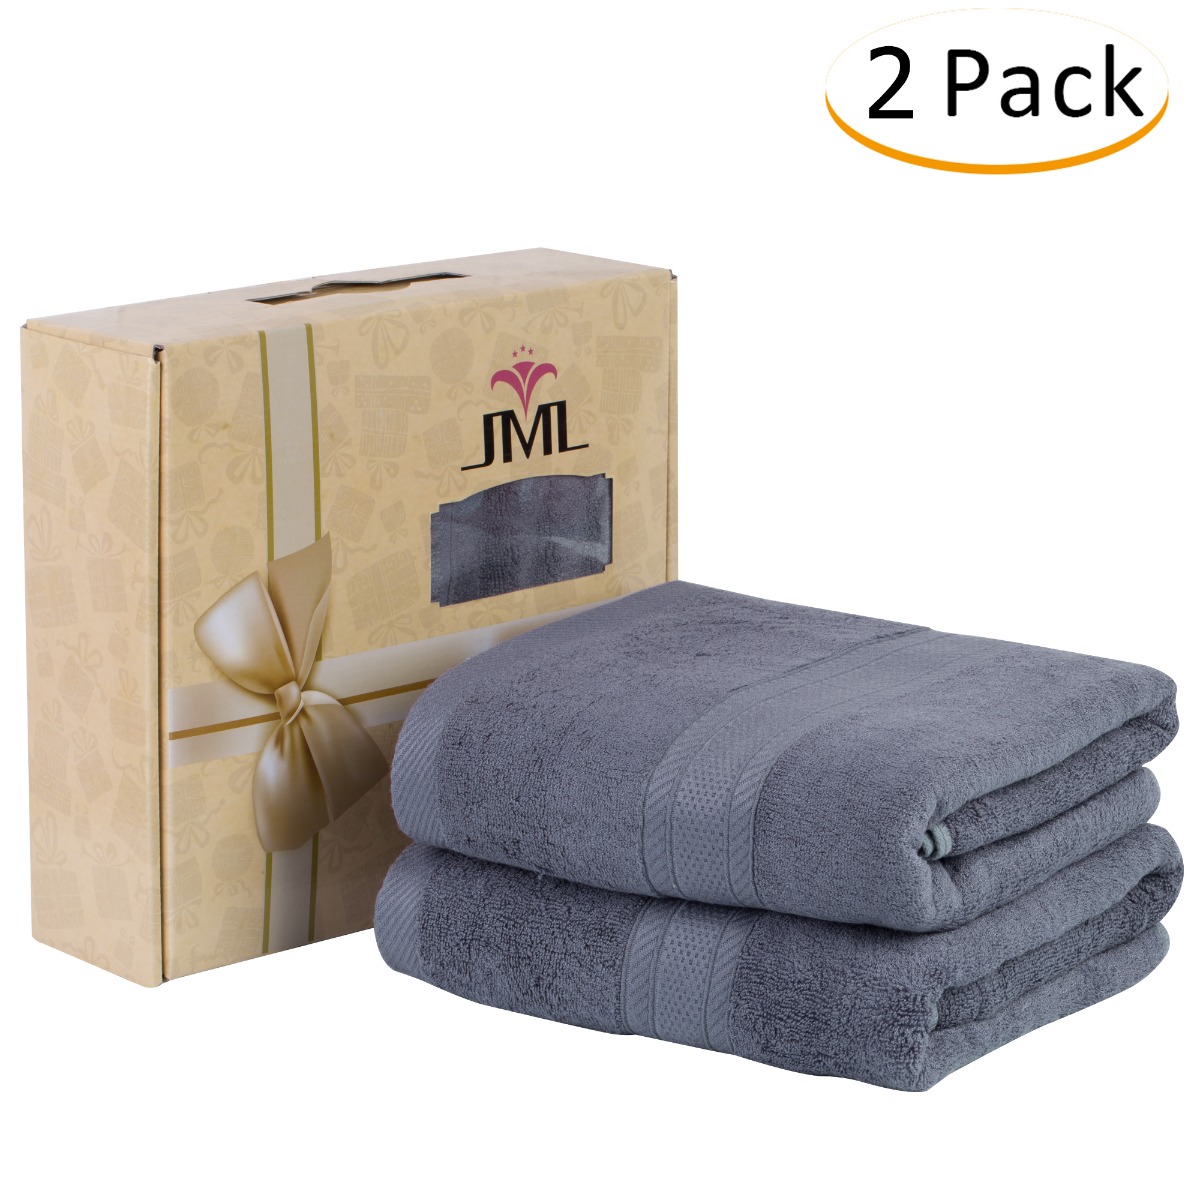 Jml Bamboo Bath Towels 2 Piece Luxury Bath Towel Set for Bathroom(27x55)  Hypoallergenic, Soft and Absorbent, Odor Resistant, Skin Friendly(White)